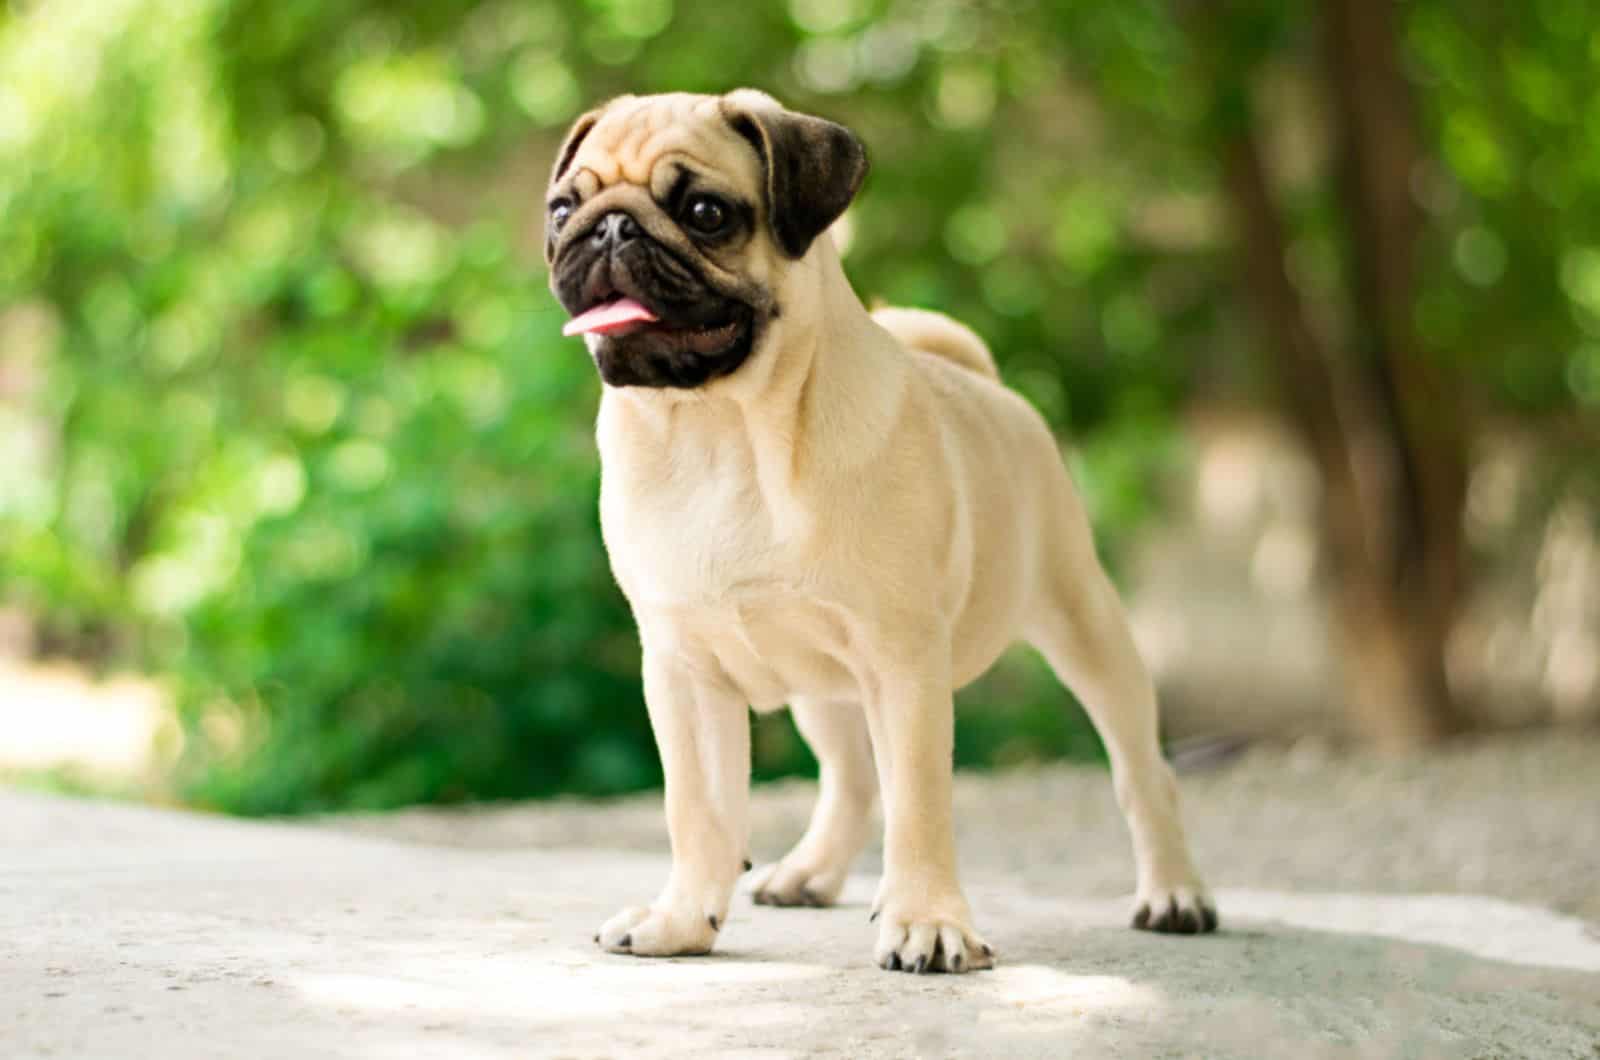 pug puppy playing outdoors